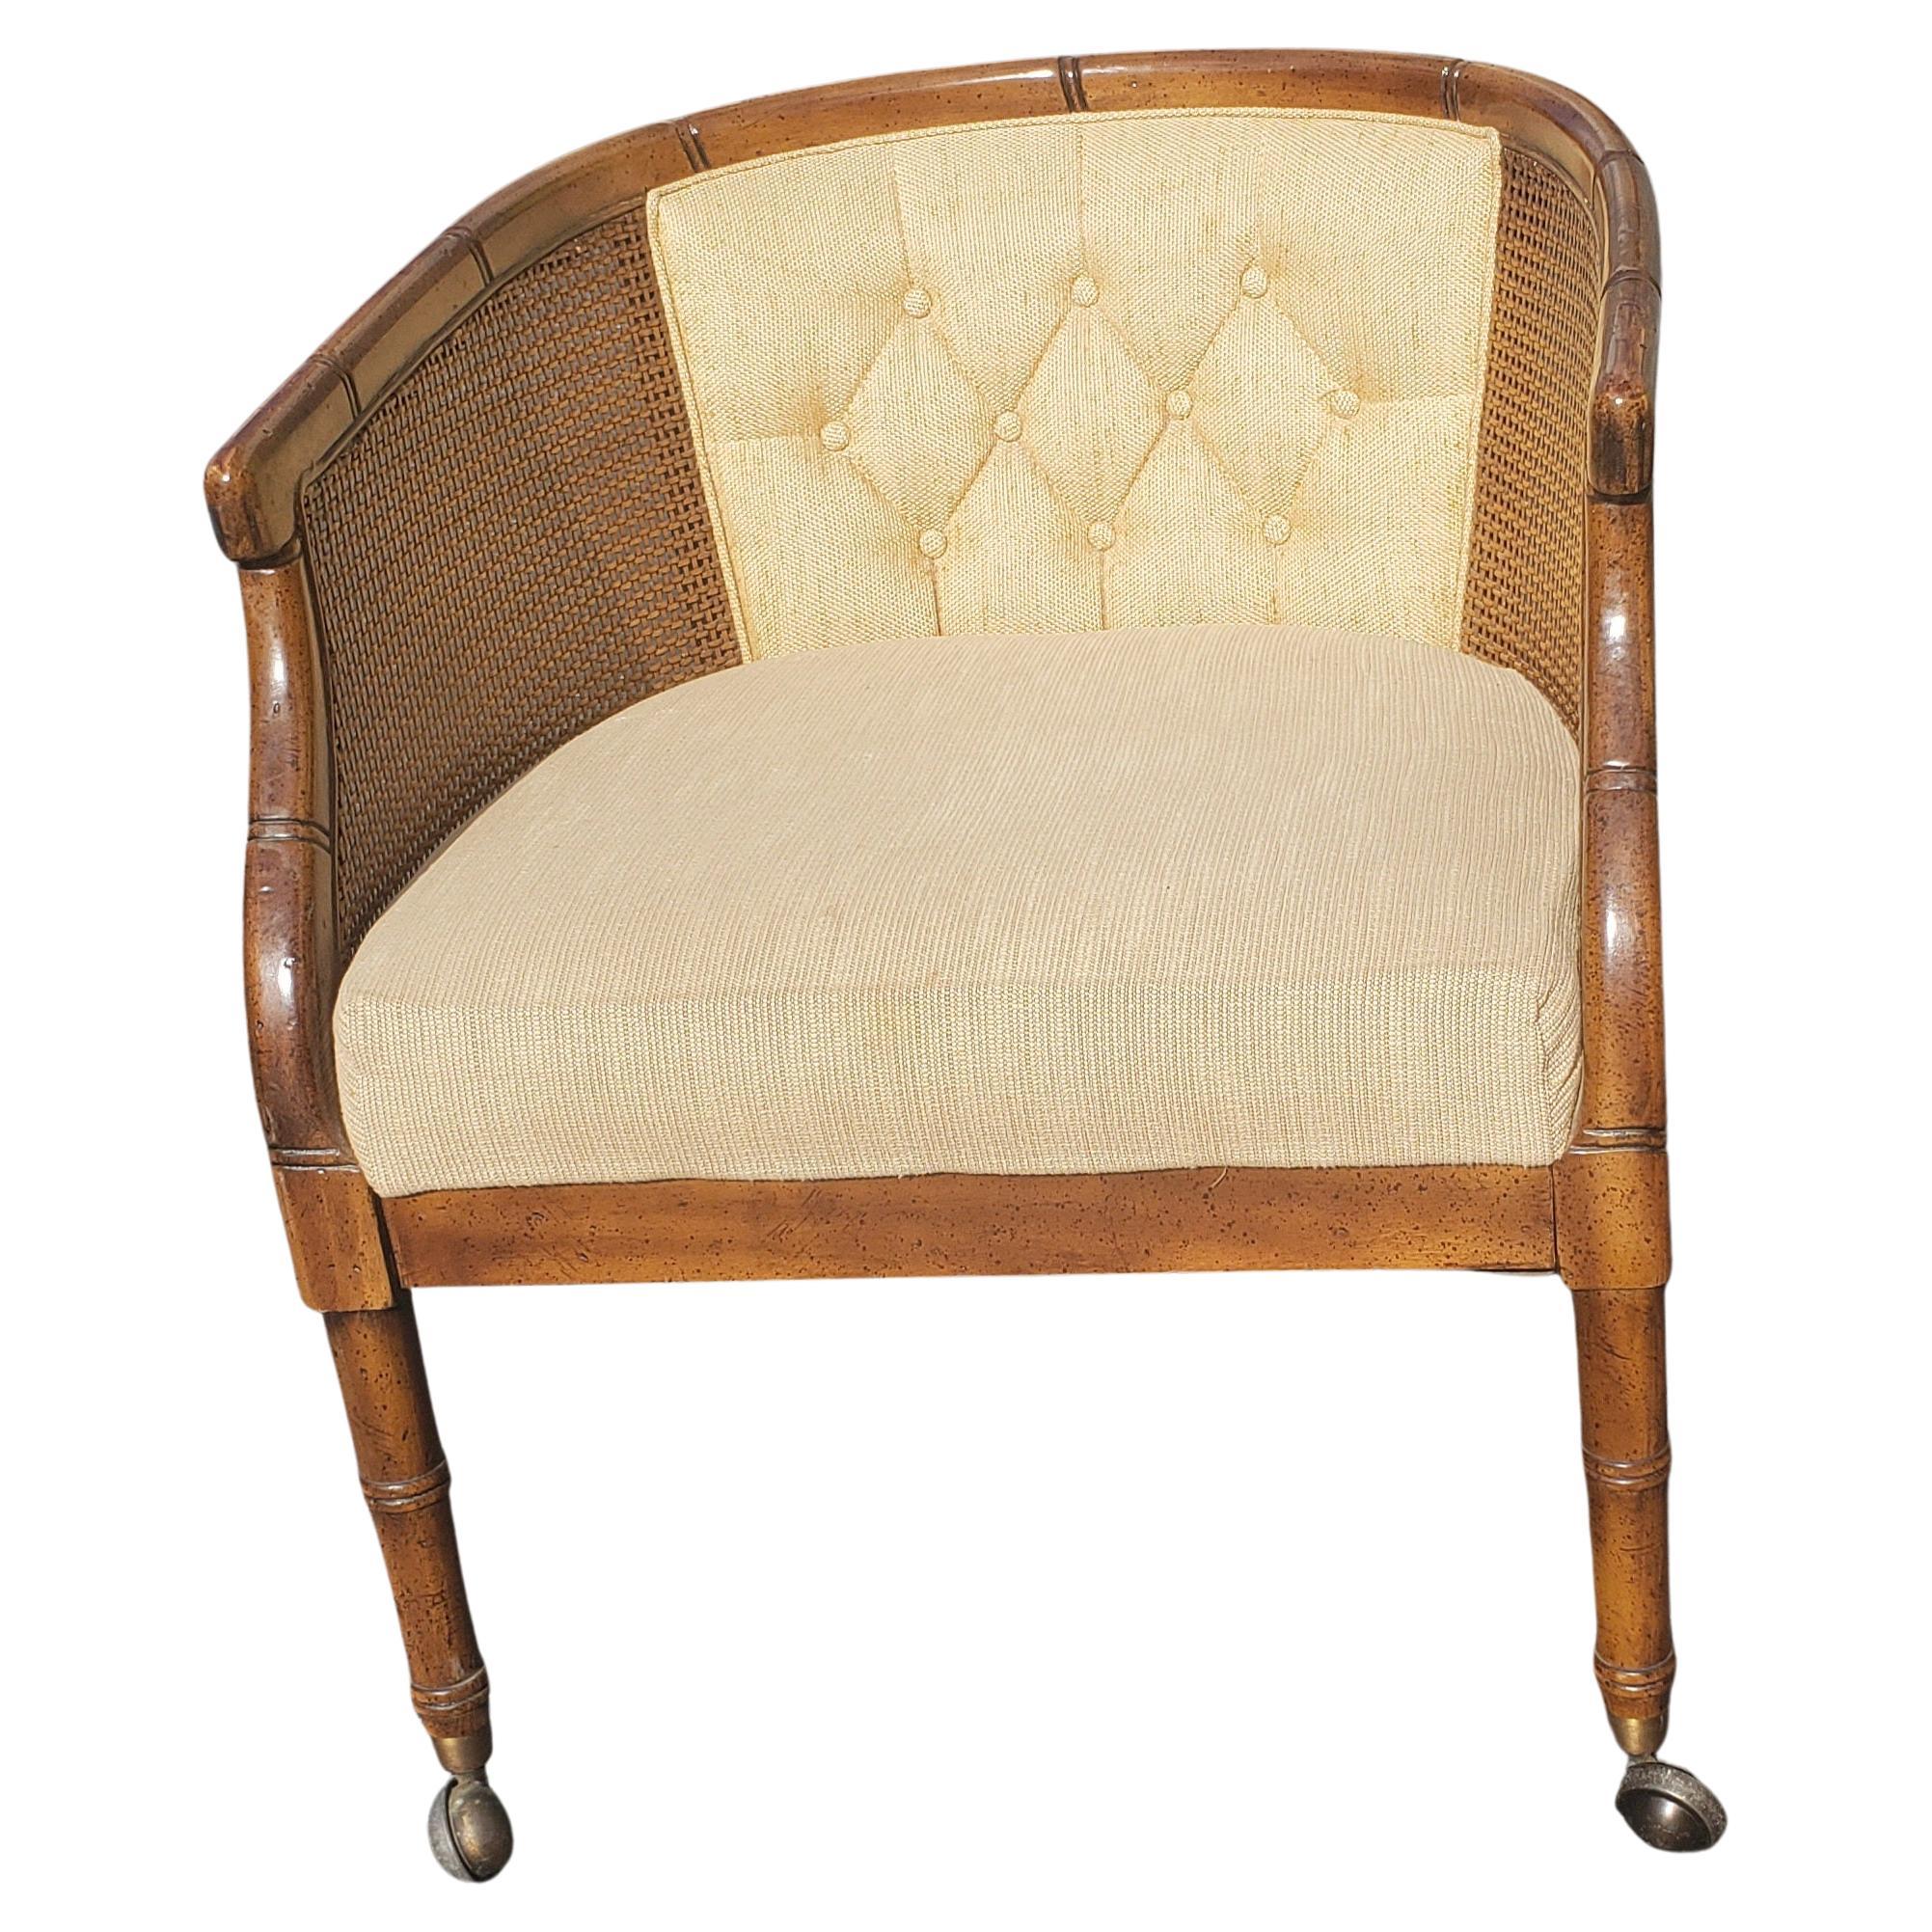 Caning Henredon French Country Walnut Faux Cane Bamboo Upholstered Club Accent Chairs